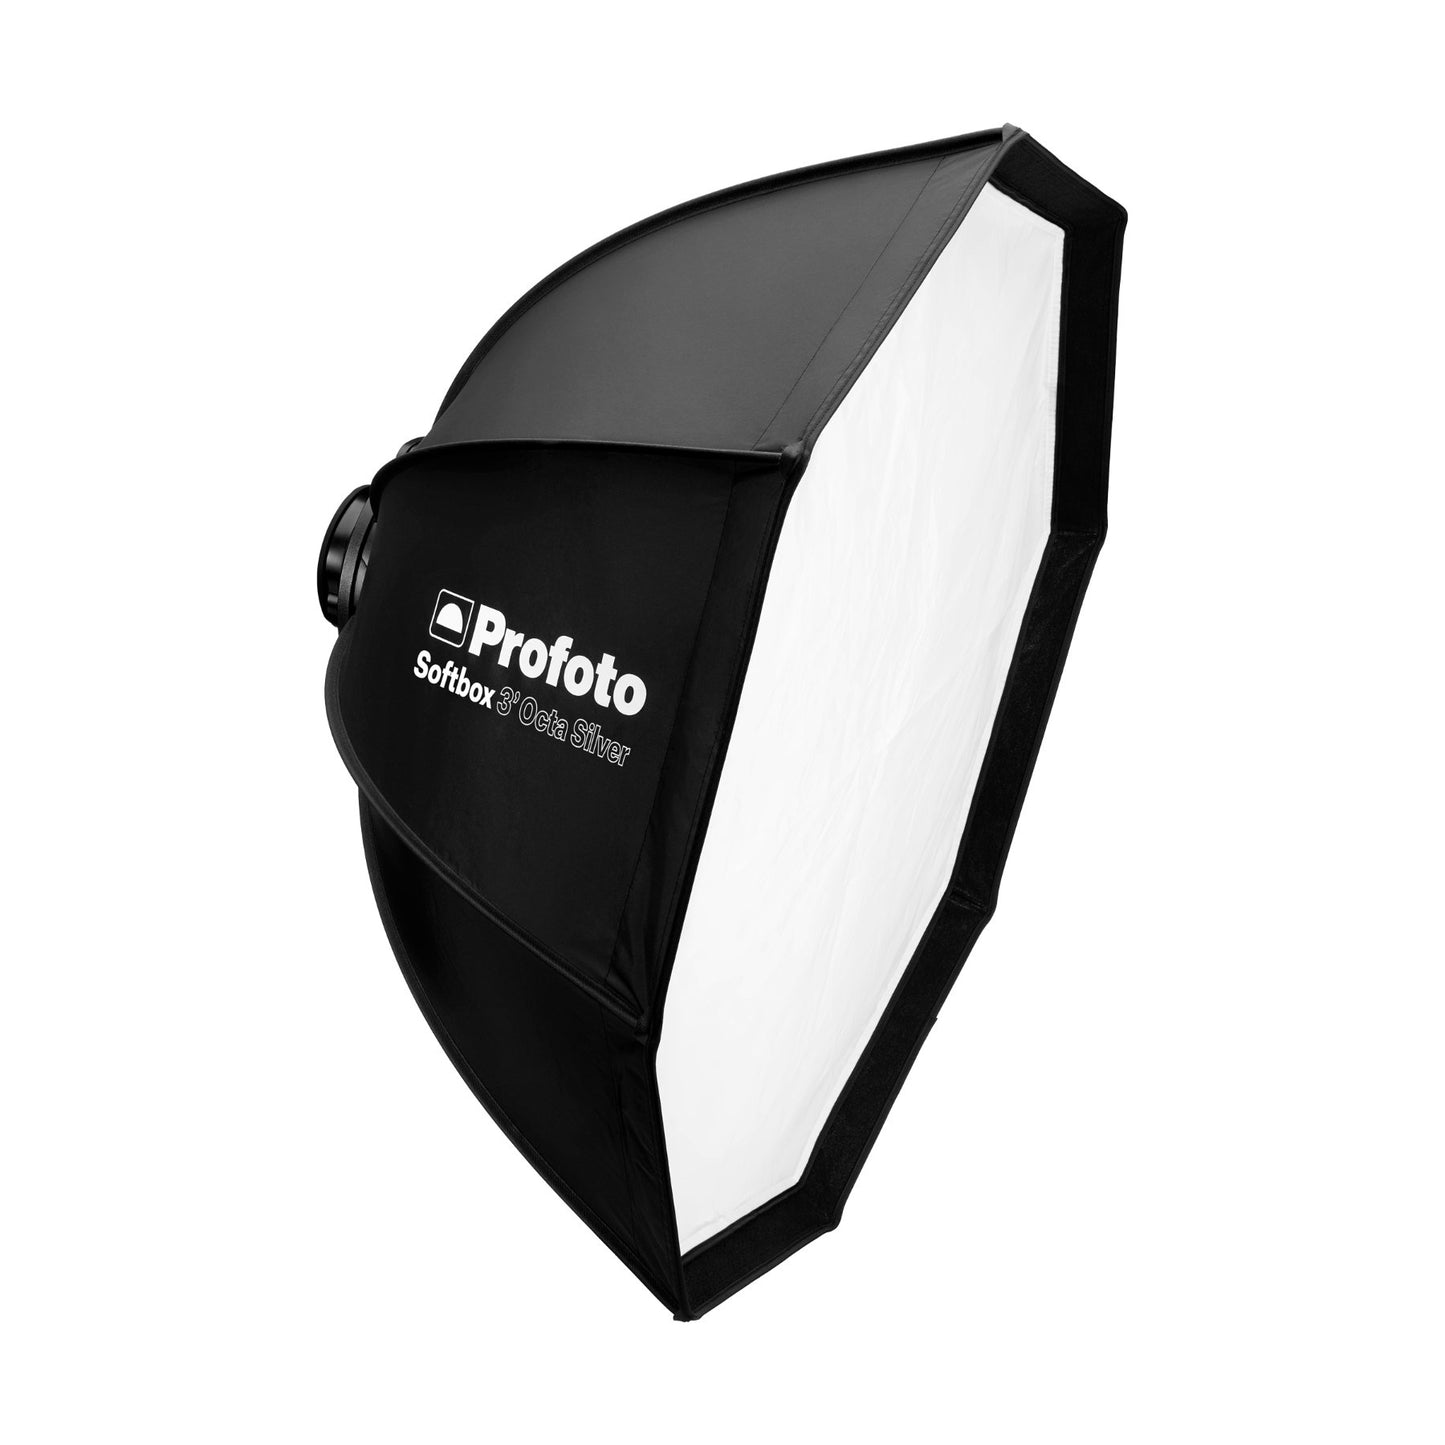 Buy Profoto Softbox 3' Octa with built-in speedring at Topic Store